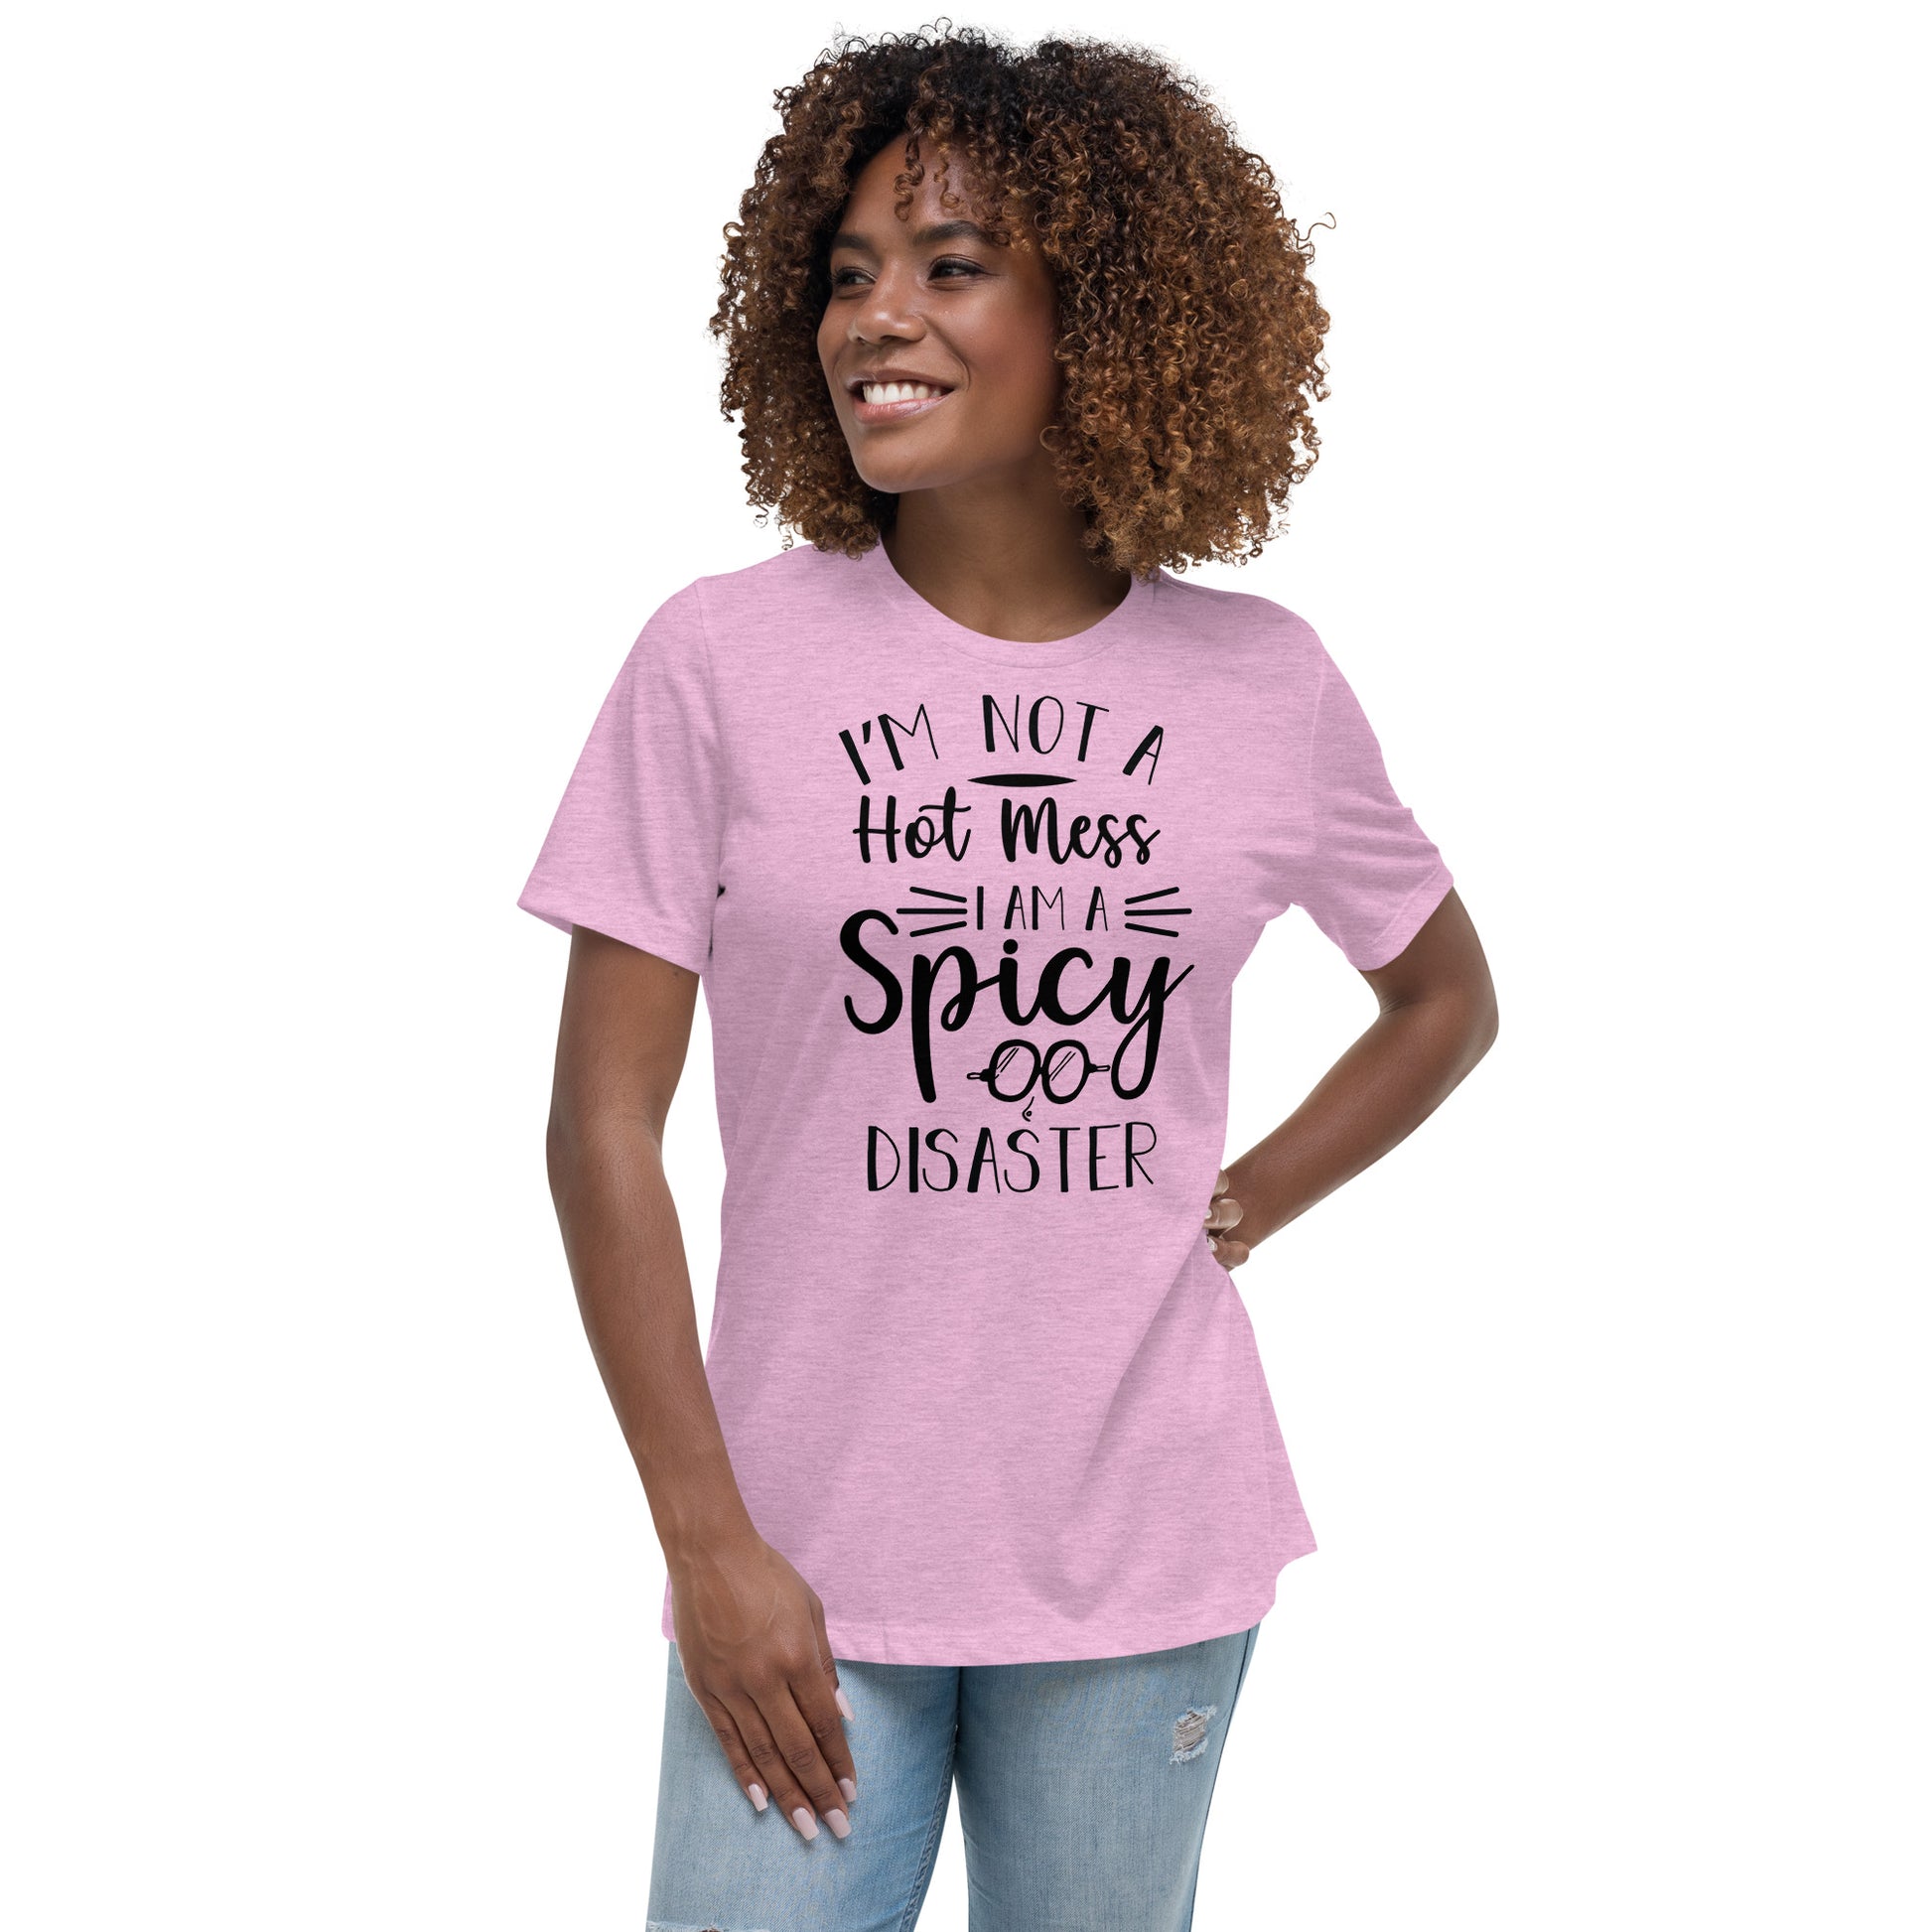 I'm Not a Hot Mess I'm a Spicy Disaster Women's Relaxed T-Shirt